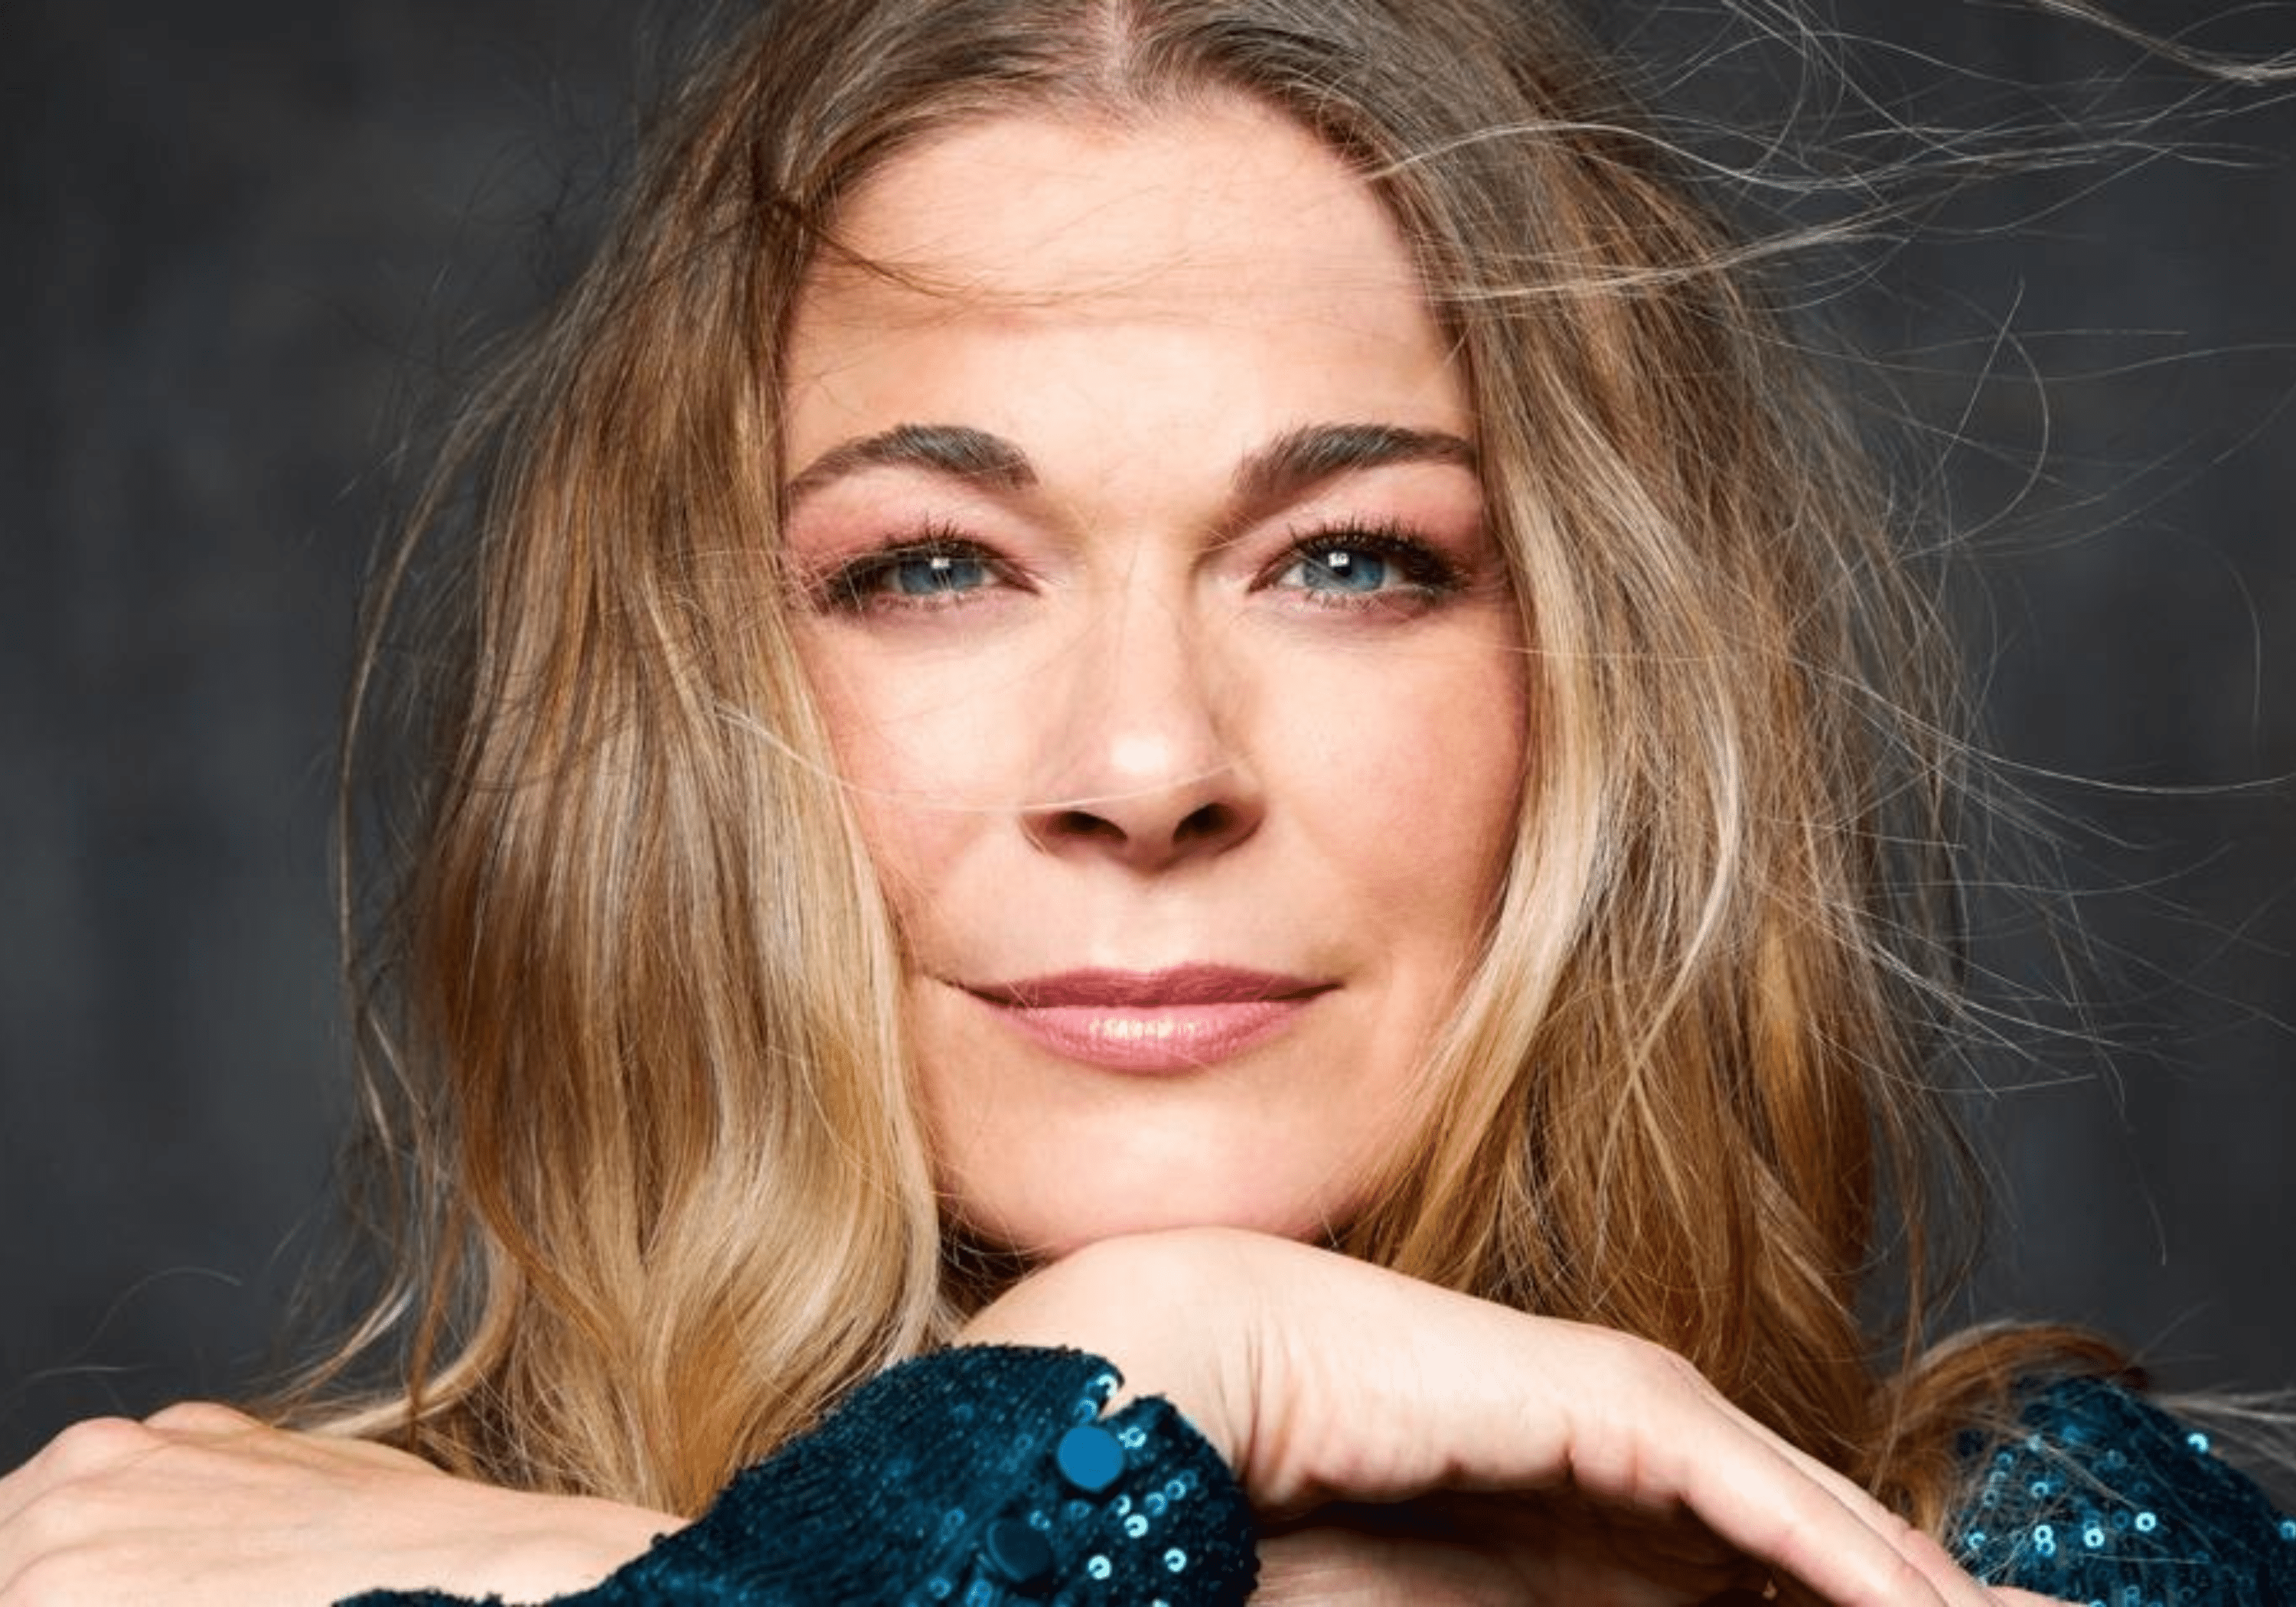 LeAnn Rimes' Health Journey From Toxicity to Hormone Balance